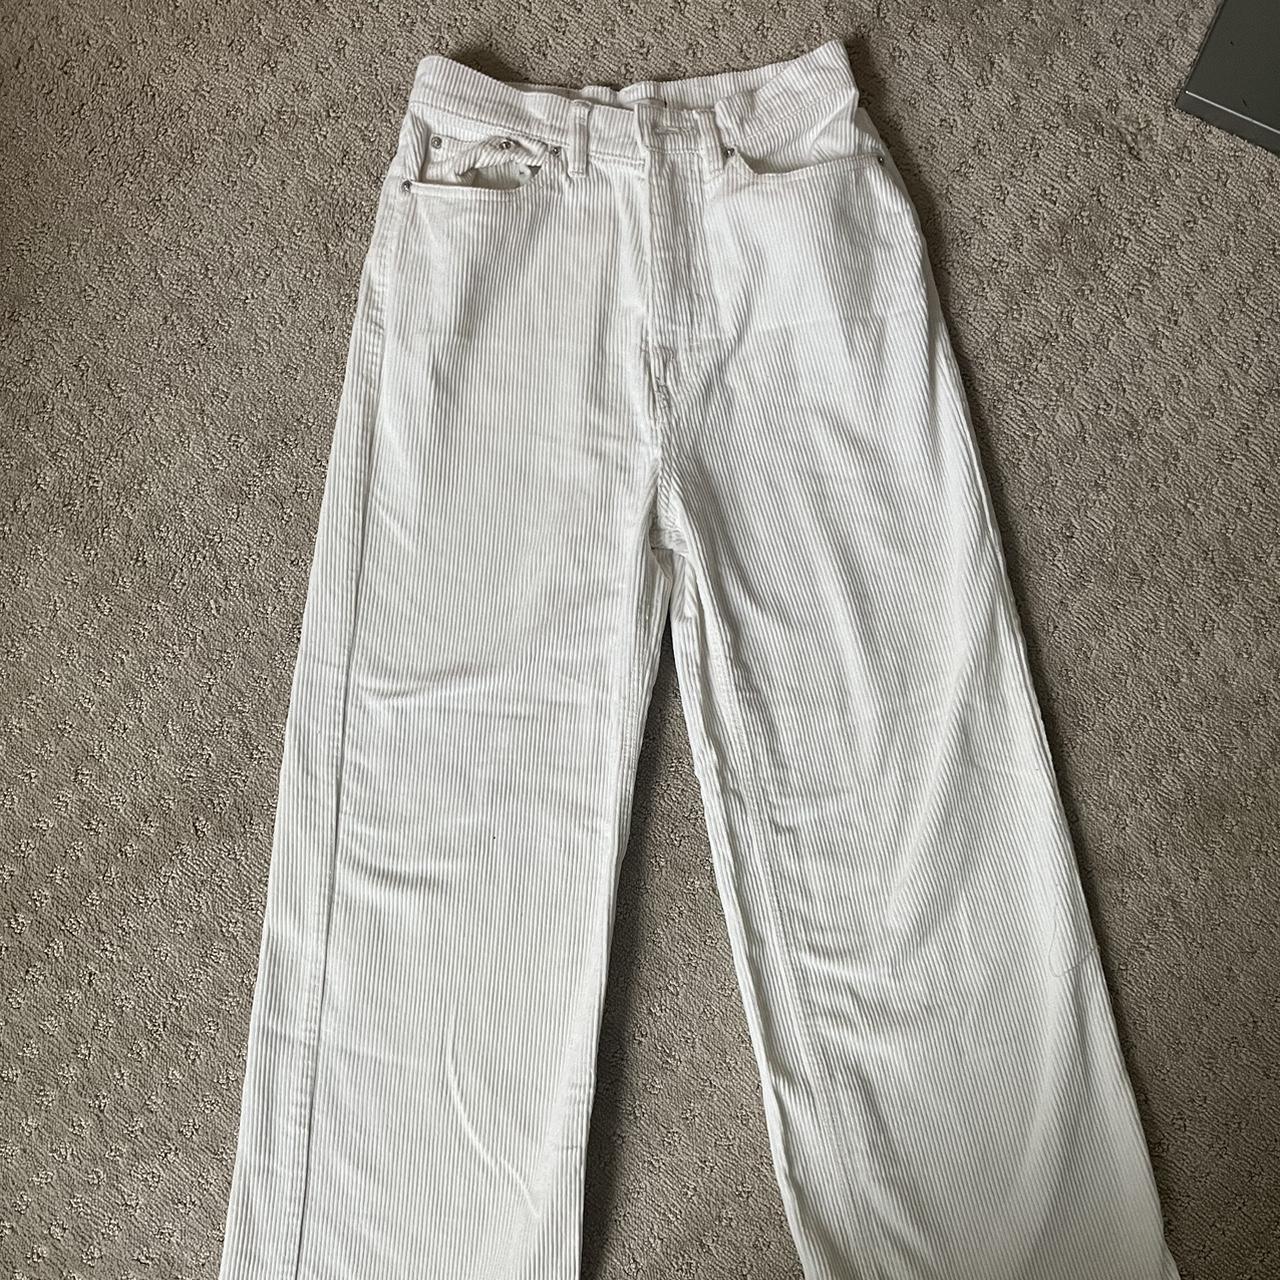 Urban Outfitters white corduroy pants! - Size:... - Depop